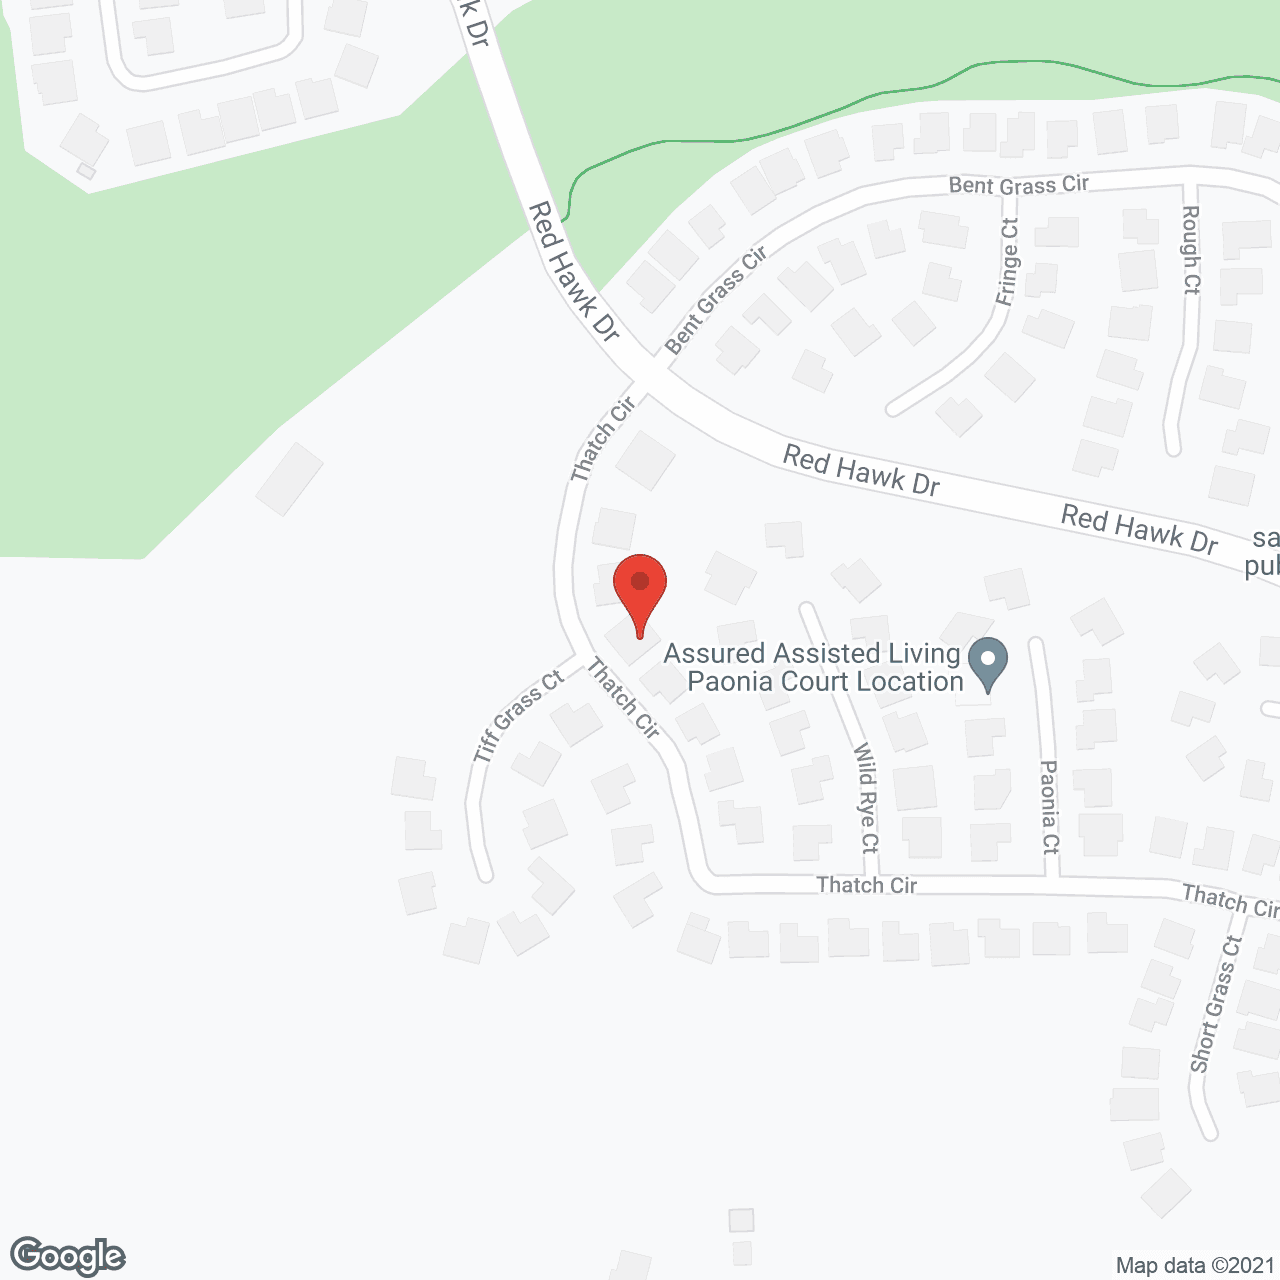 Assured Assisted Living 5 in google map